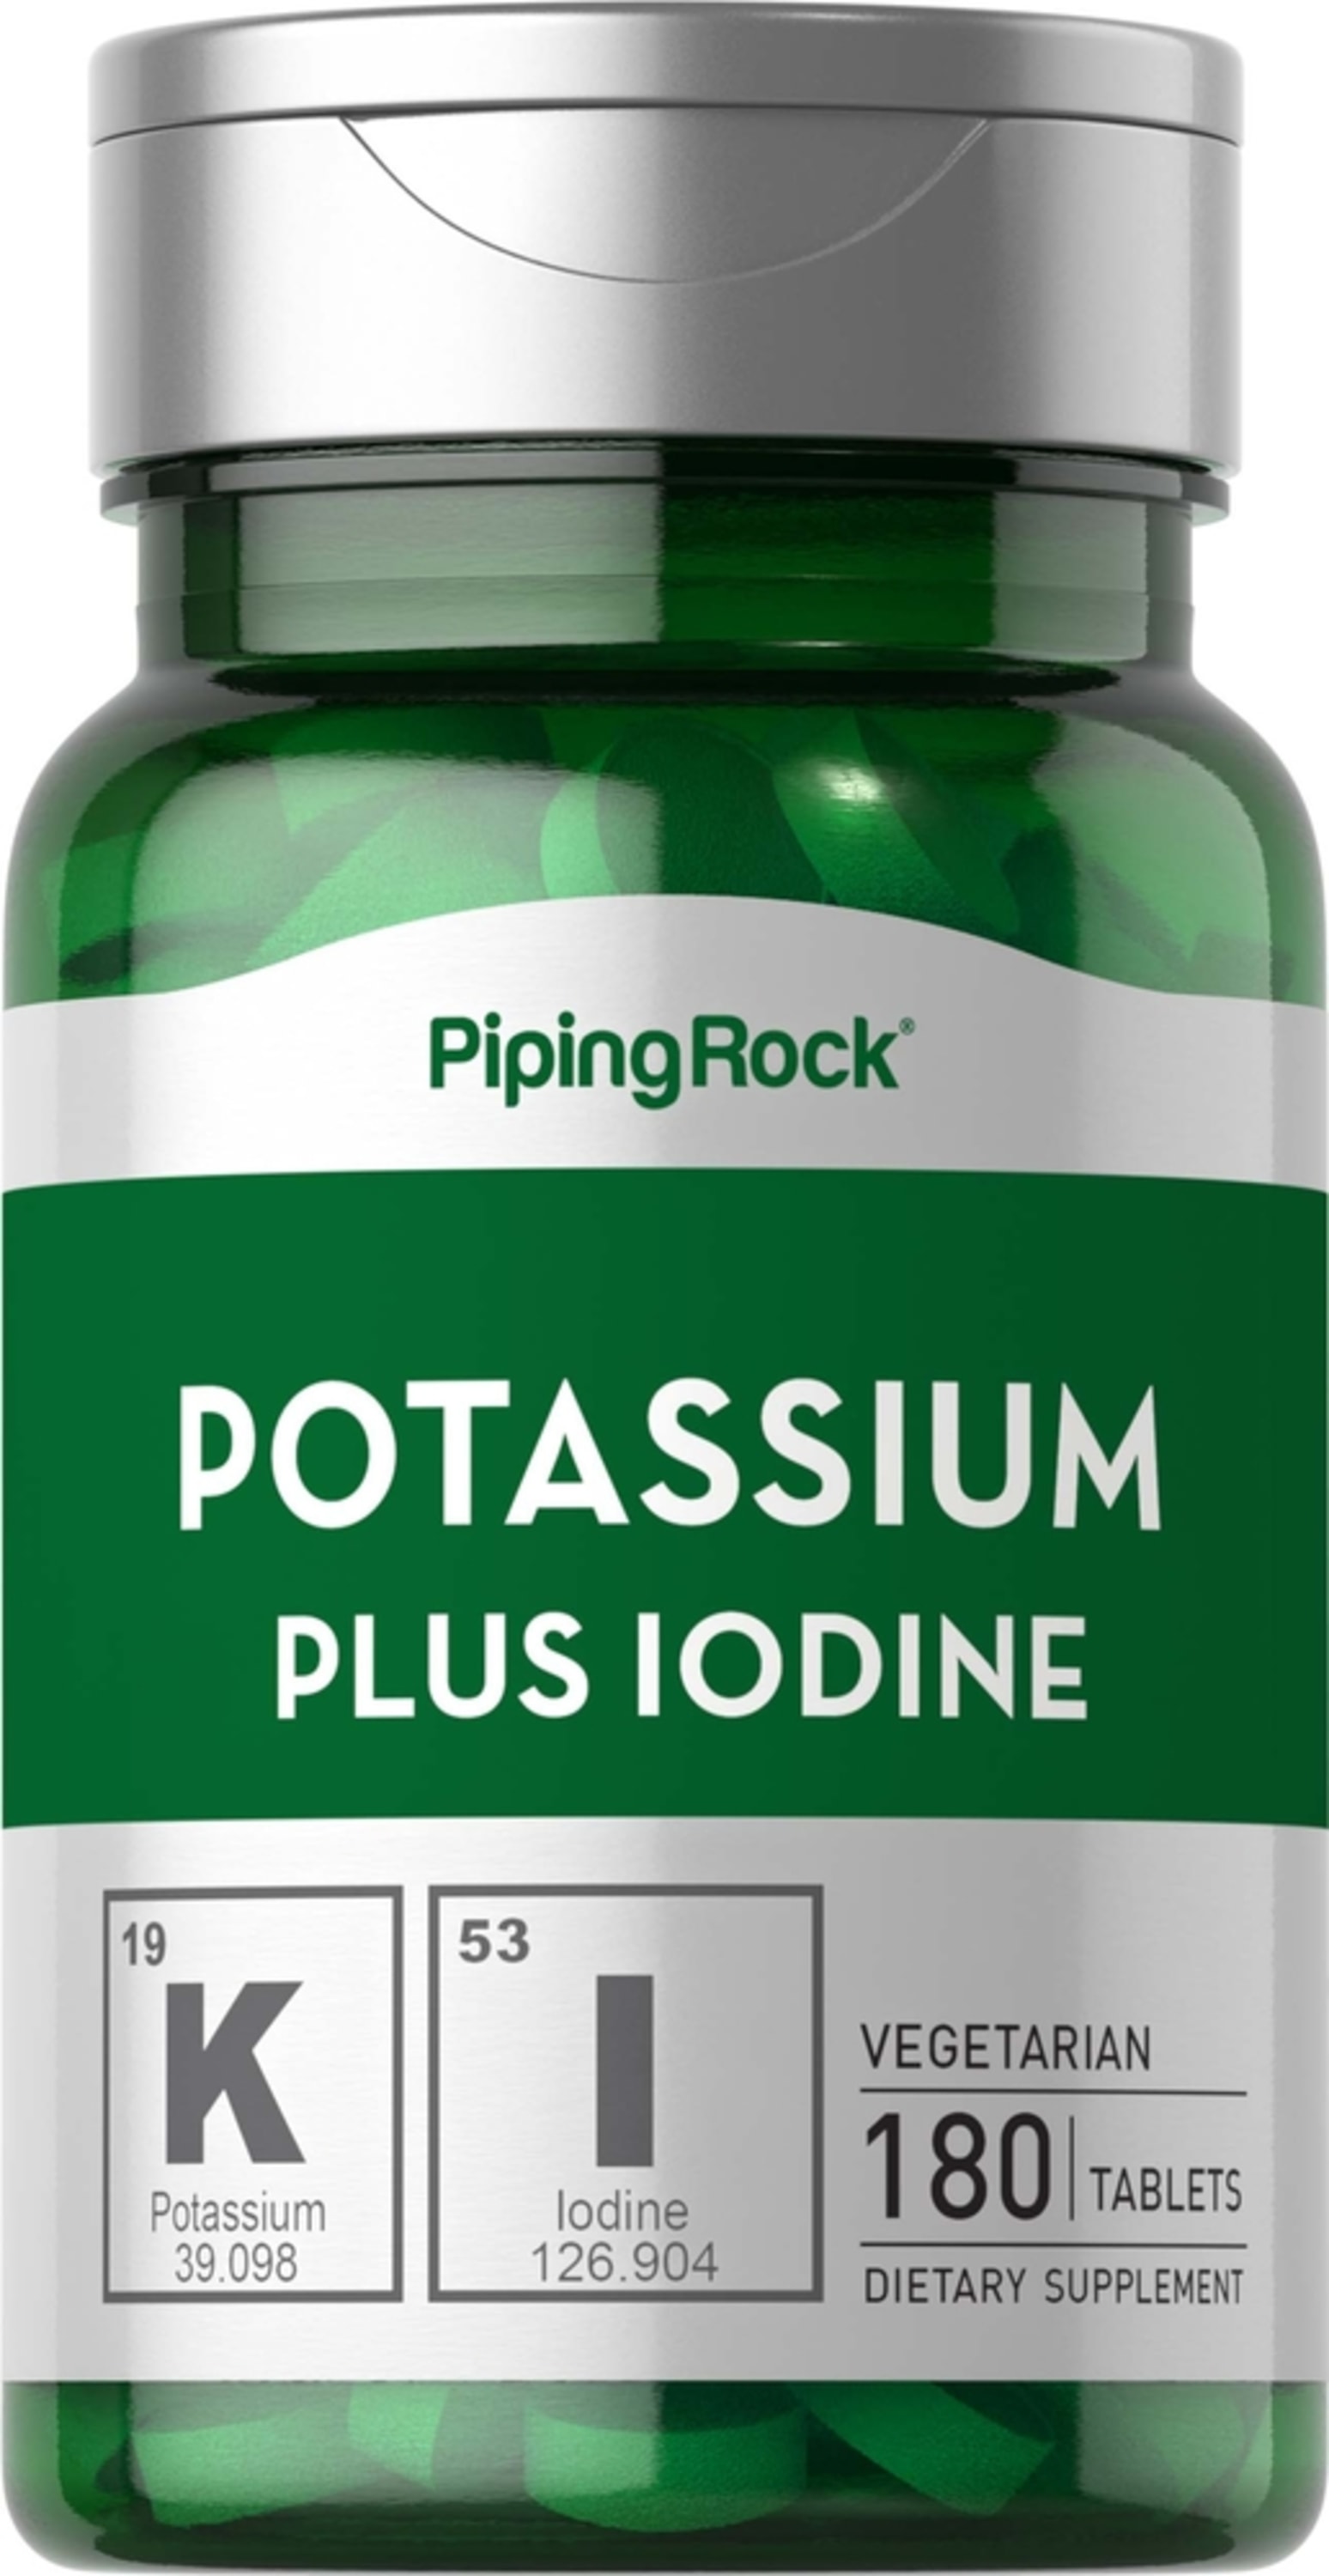 Potassium Iodine Tablets | Benefits | PipingRock Health Products